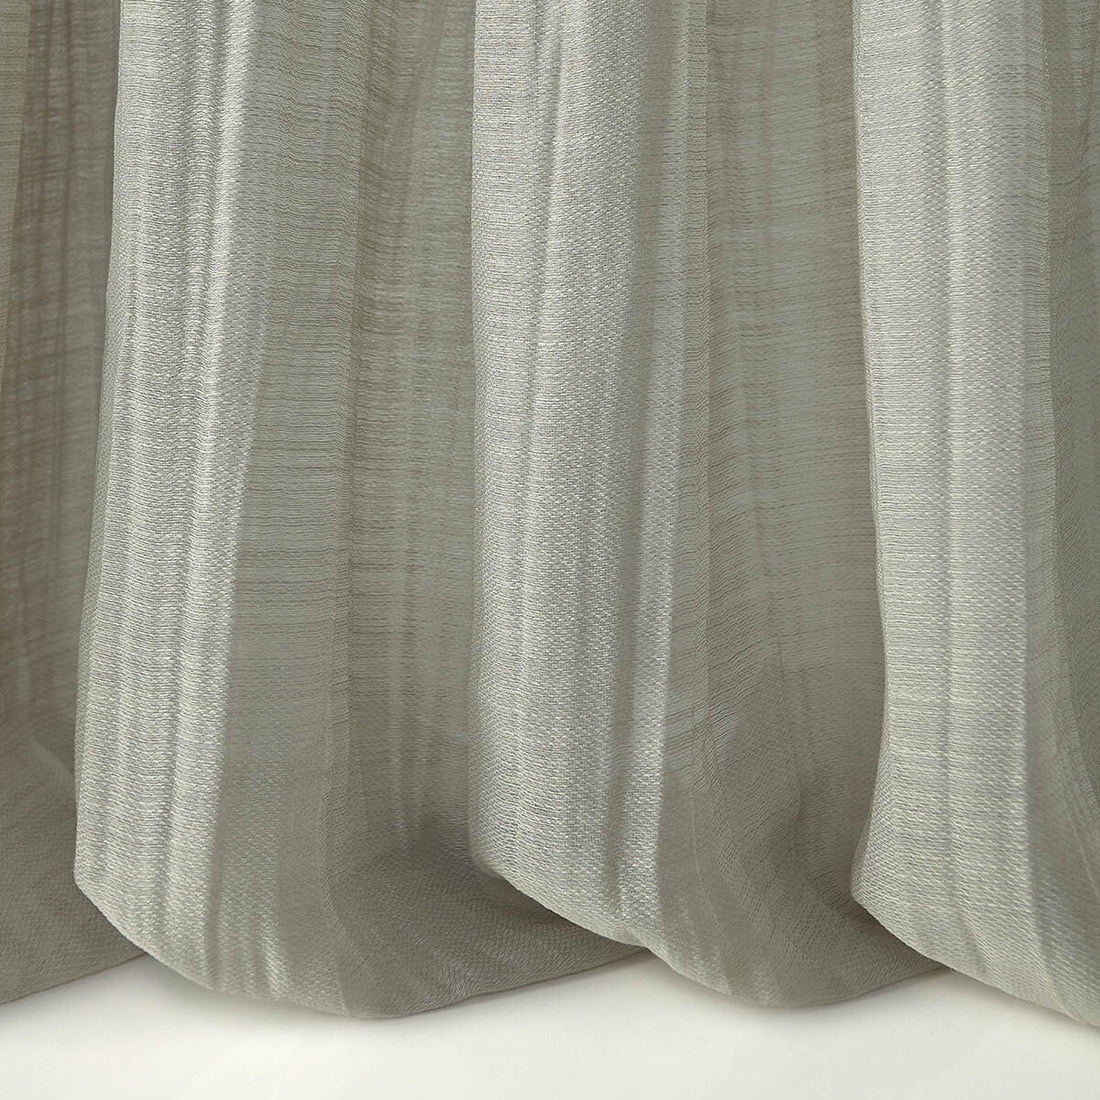 Hadid fabric in 9 color - pattern LZ-30339.09.0 - by Kravet Design in the Lizzo collection